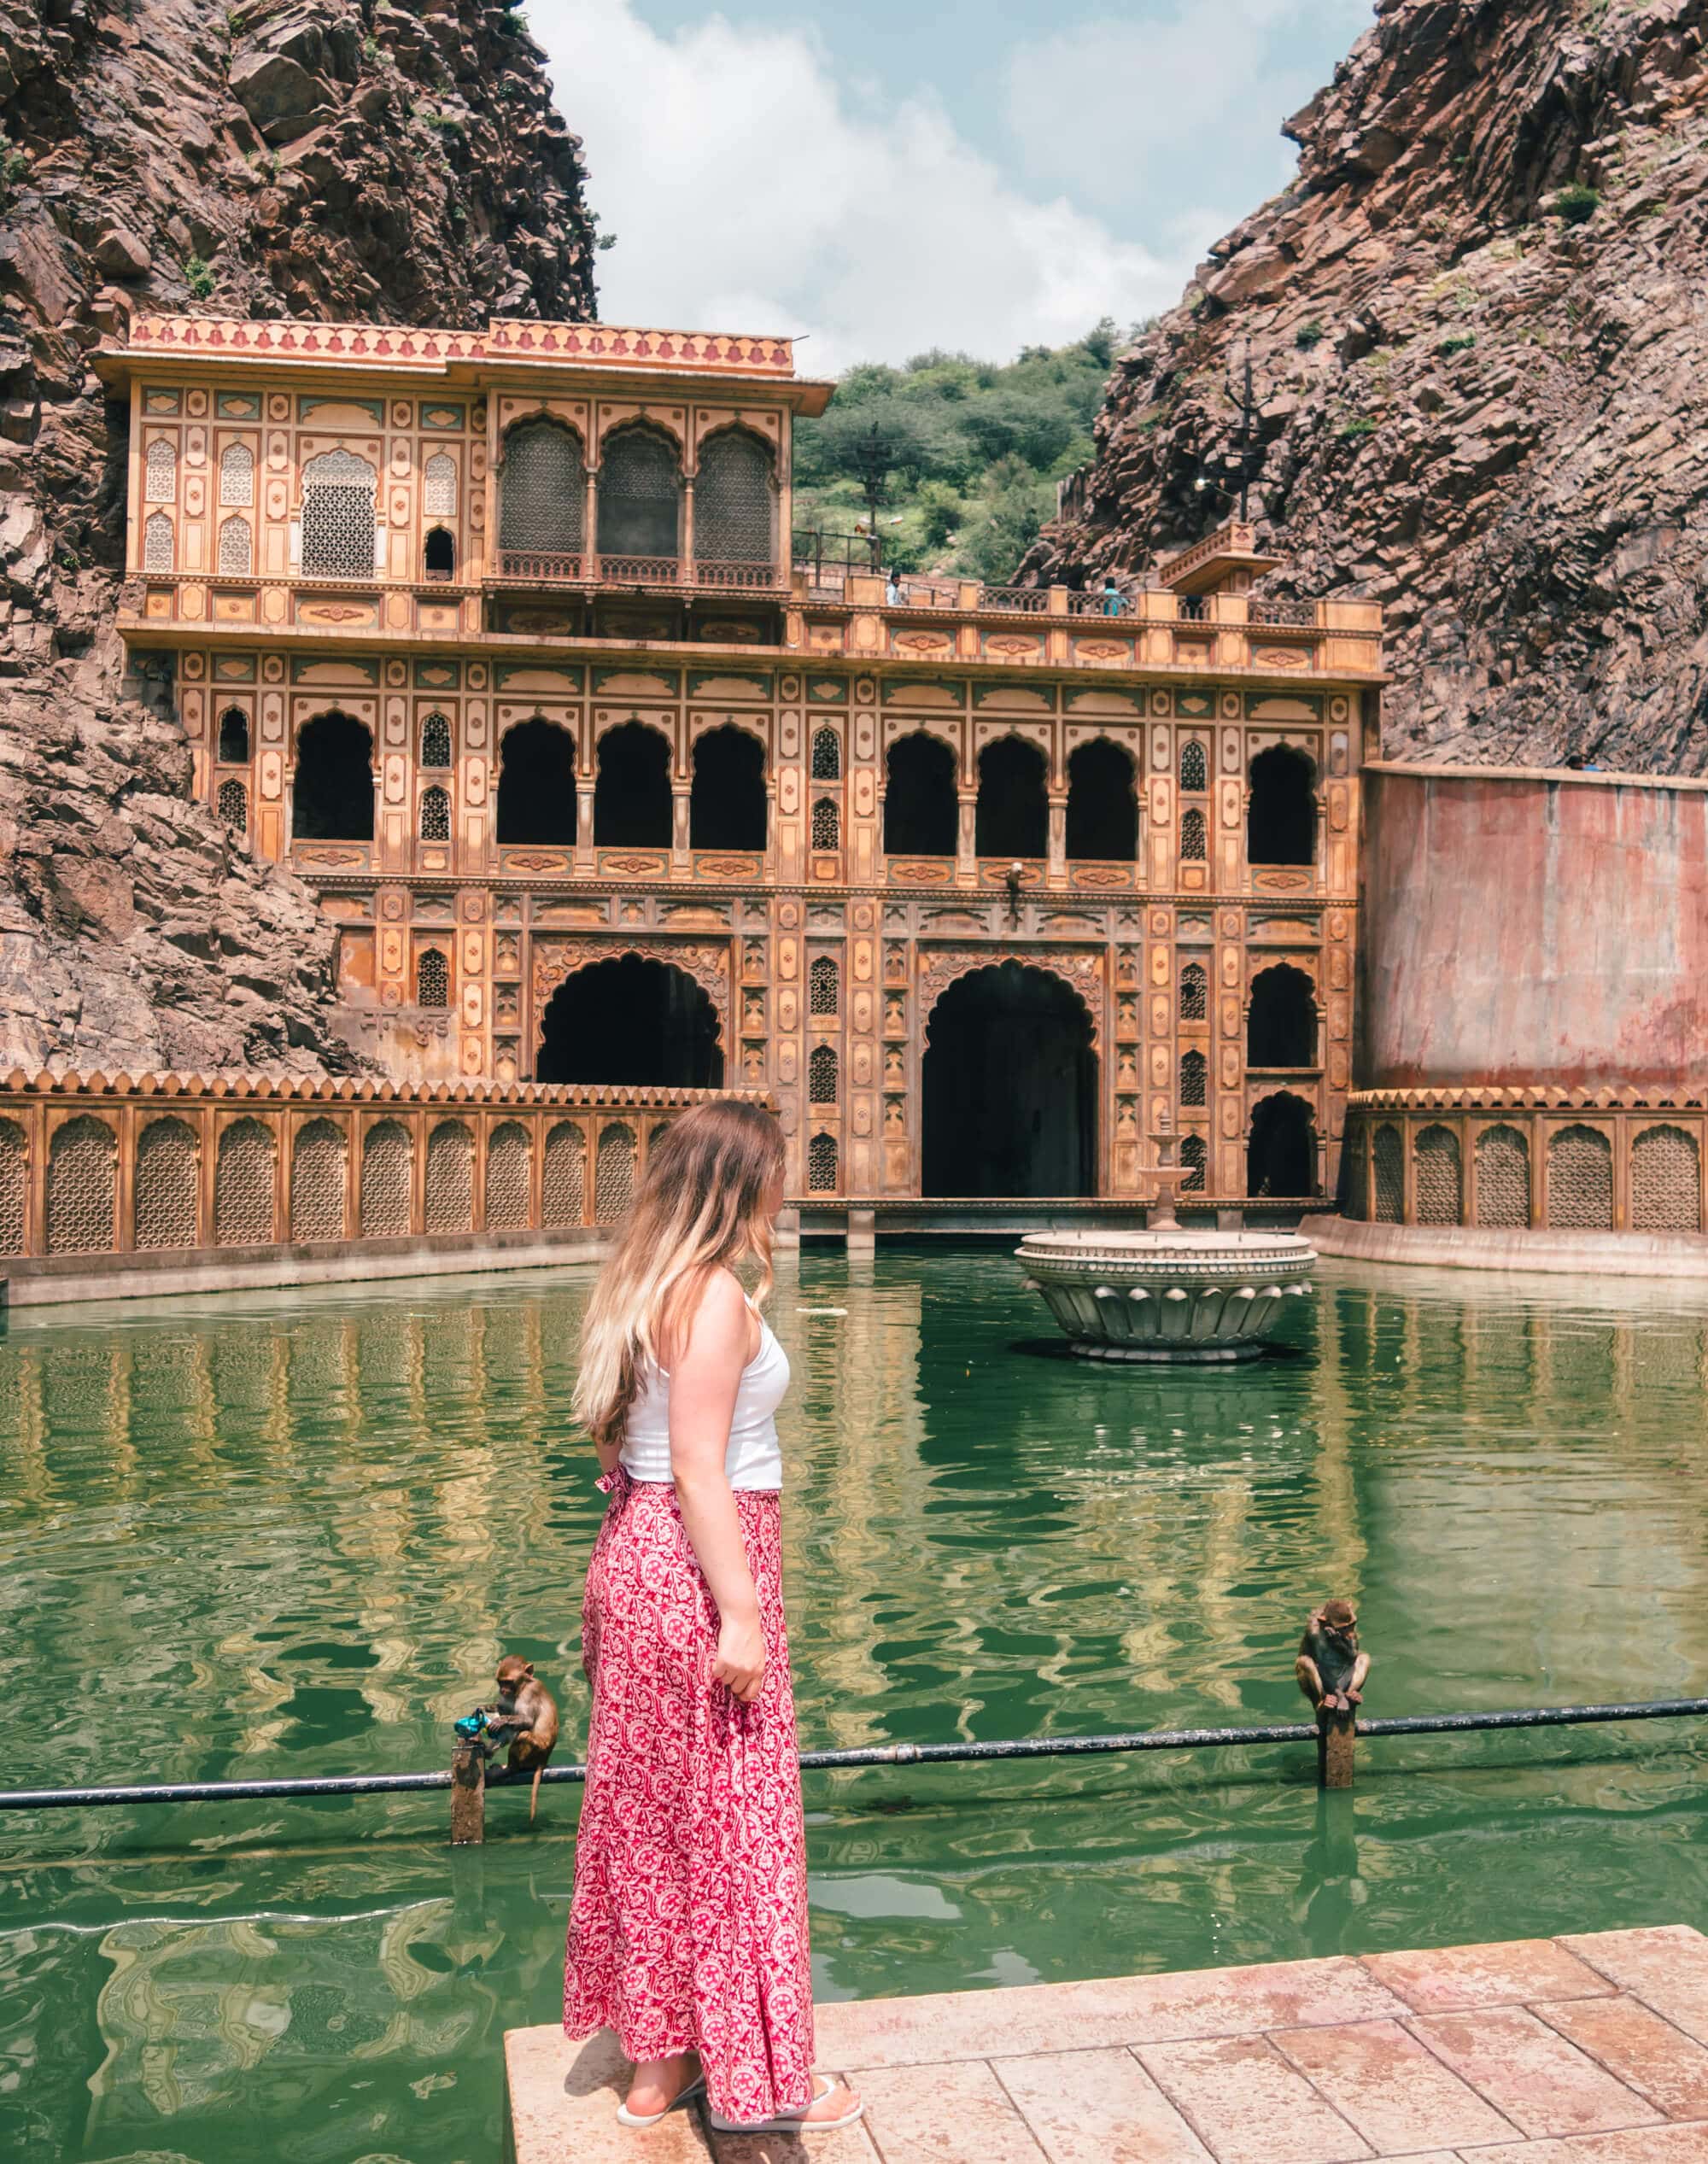 Girl with long hair, wearing a white top and pink maxi skirt, standing in front of a green pool at Galtaji Monkey Temple, one of the places you must see during your two days in Jaipur.